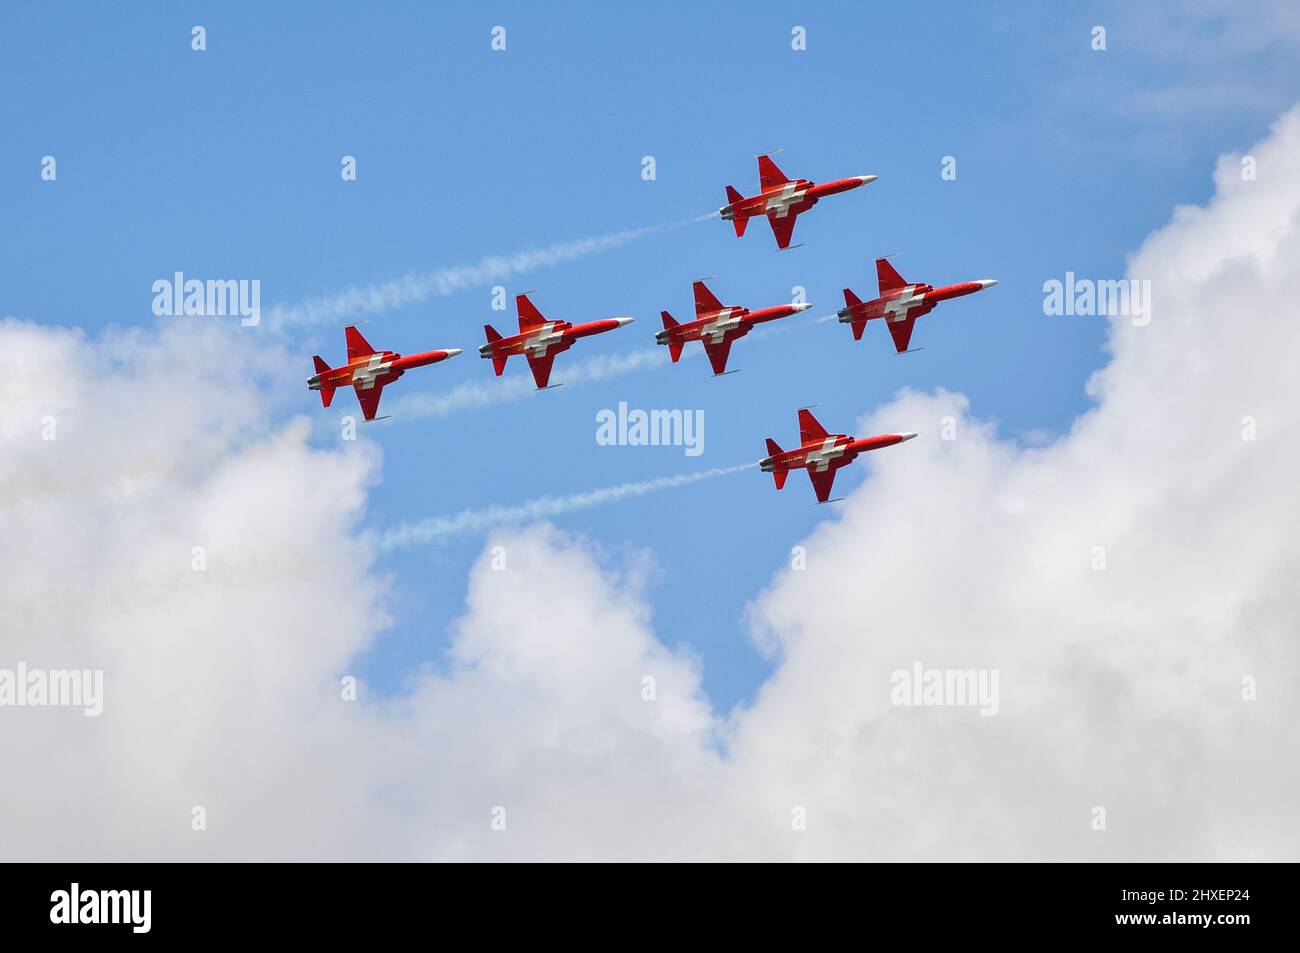 Patrouille Suisse, Swiss display team fighter jet planes flying in formation at Royal International Air Tattoo airshow, RAF Fairford, UK Stock Photo